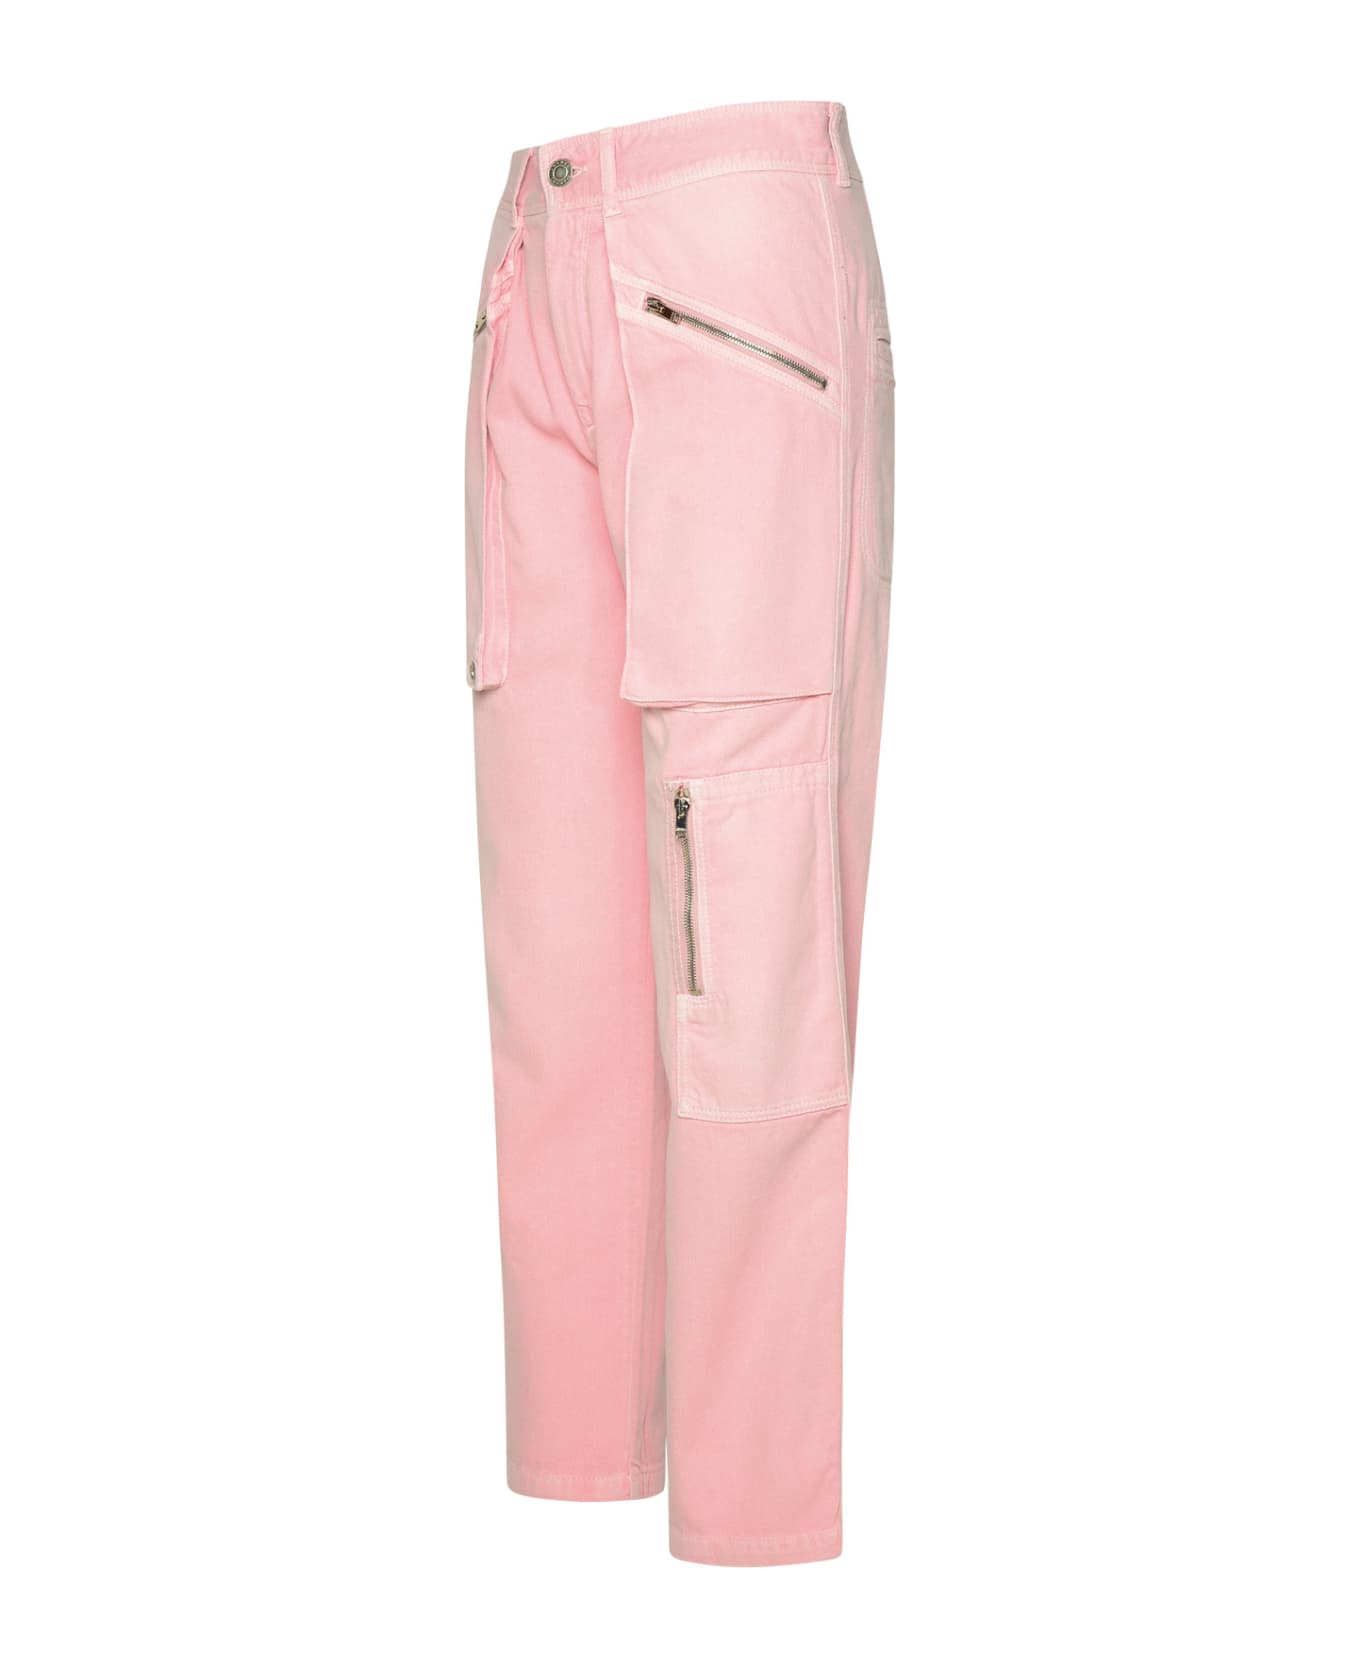 Isabel Marant 'juliette' Pink Cotton Trousers - Pink ボトムス